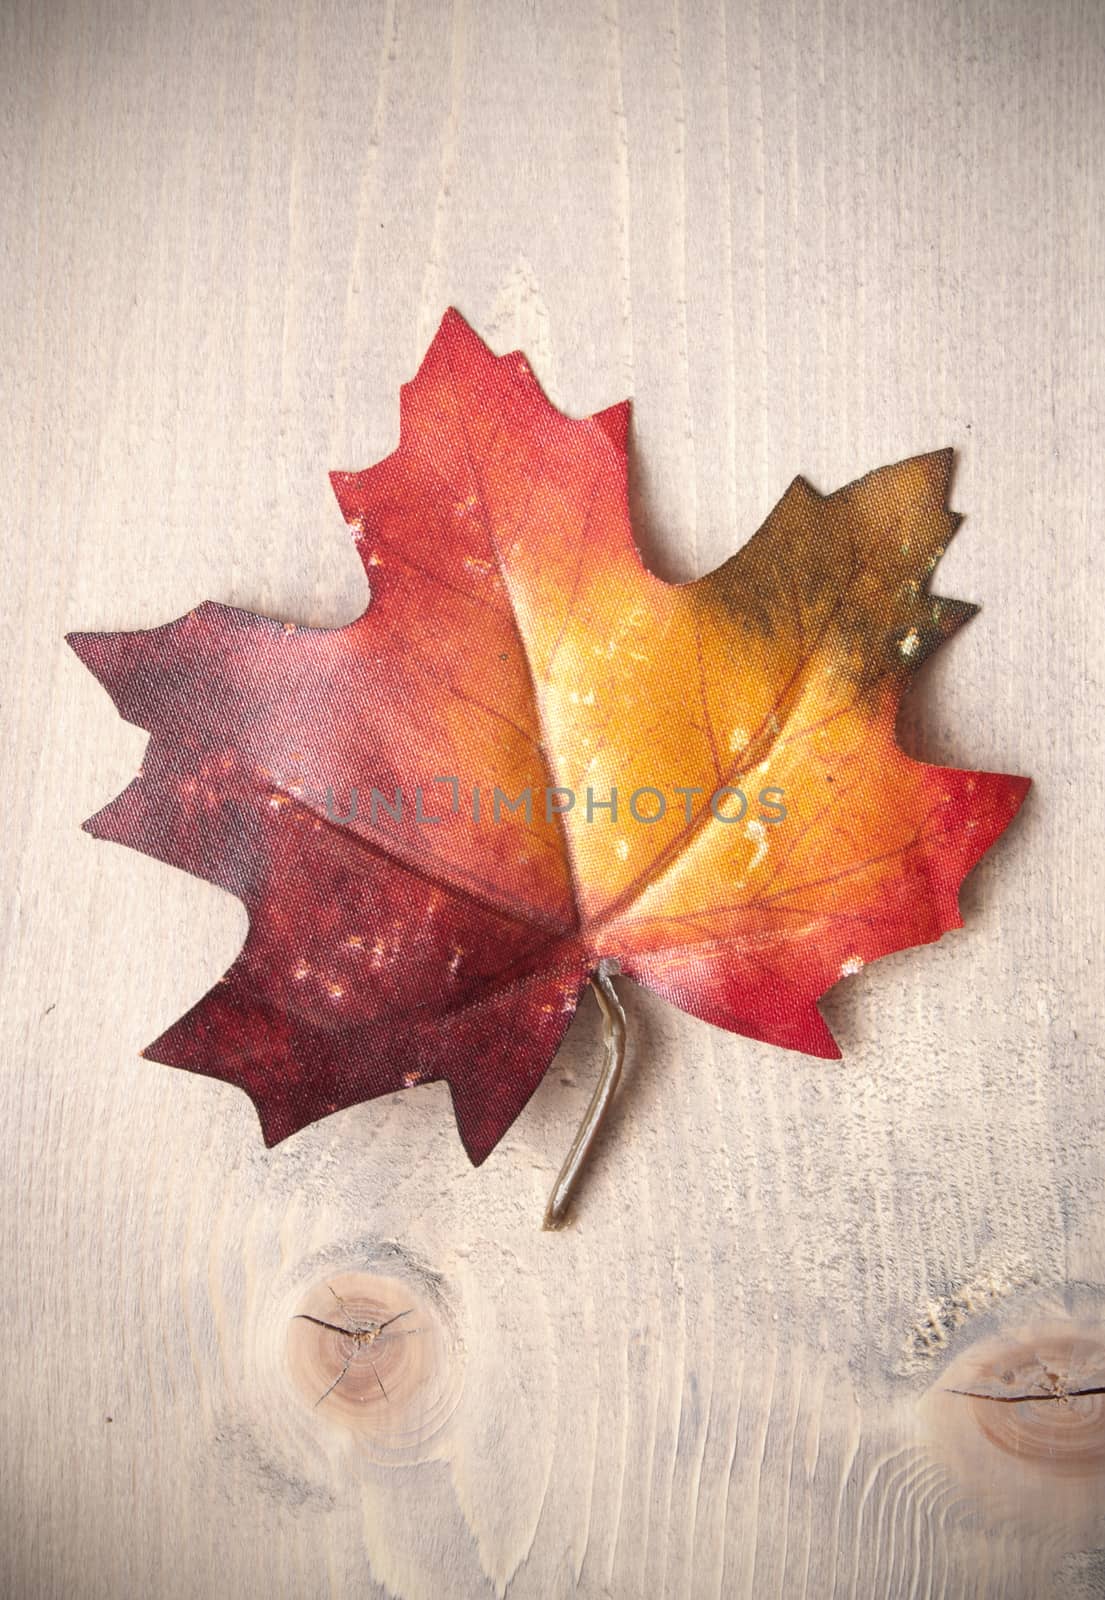 Autumn leaf on top of a wooden background